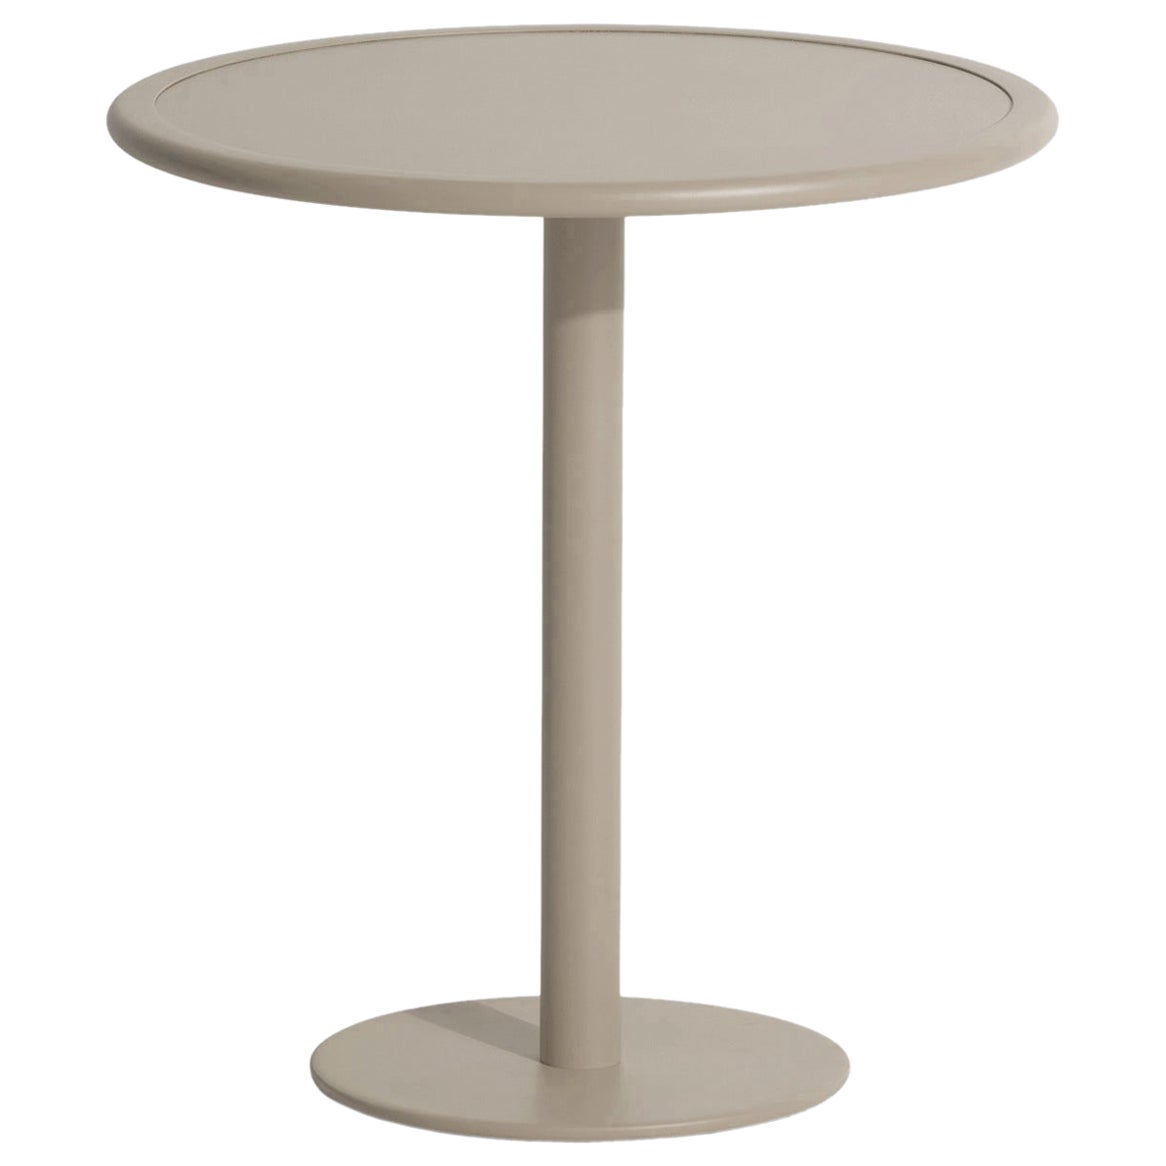 Petite Friture Week-End Bistro Round Dining Table in Dune Aluminium, 2017 For Sale